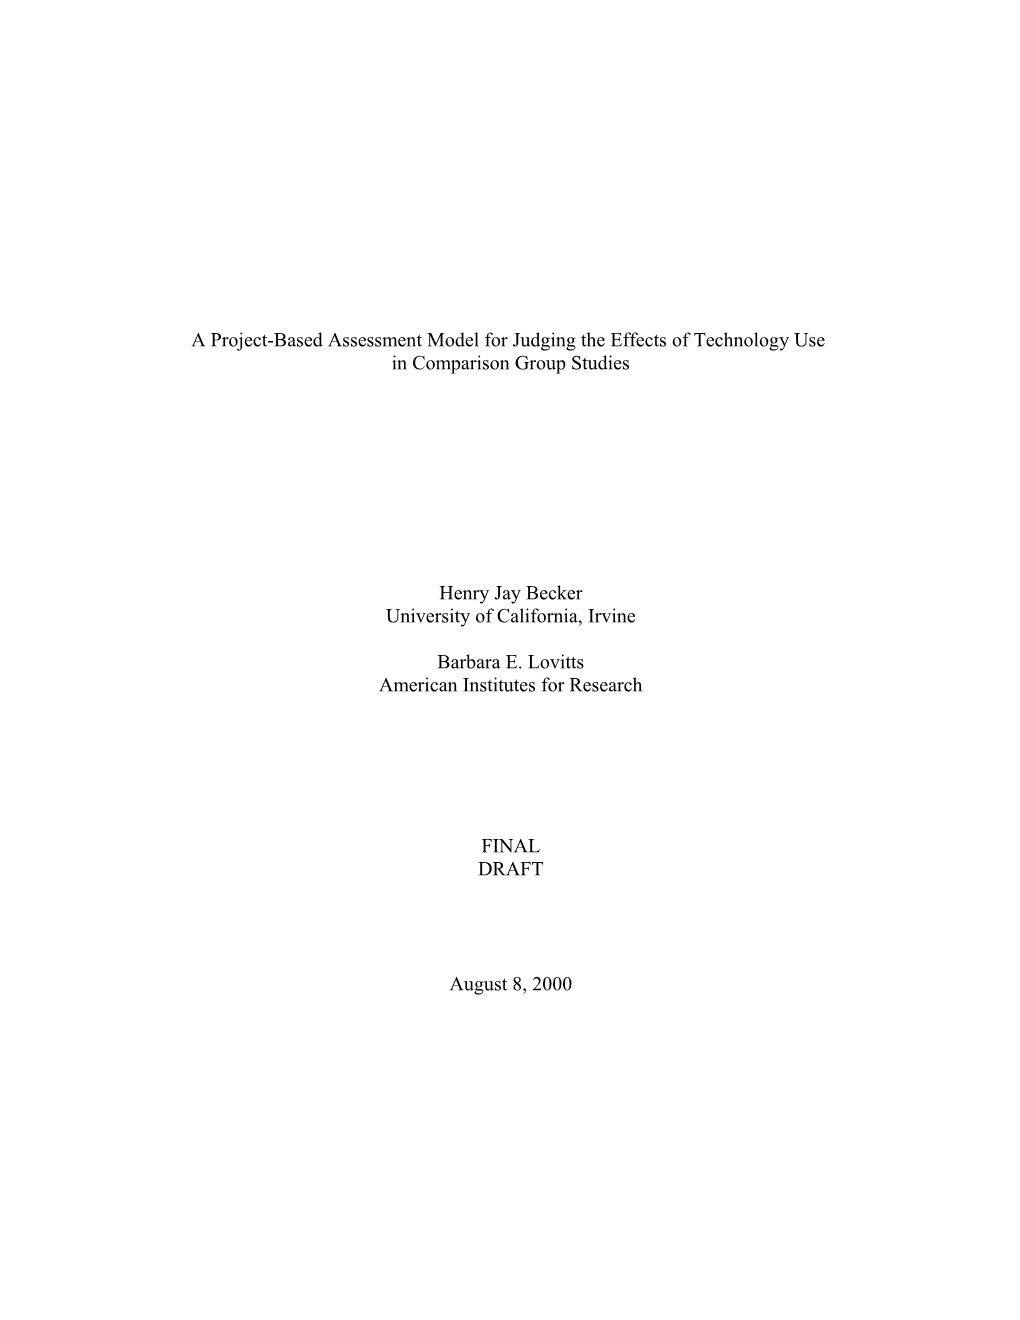 A Performance Assessment-Based Model for Judging the Effects of Technology Use in A